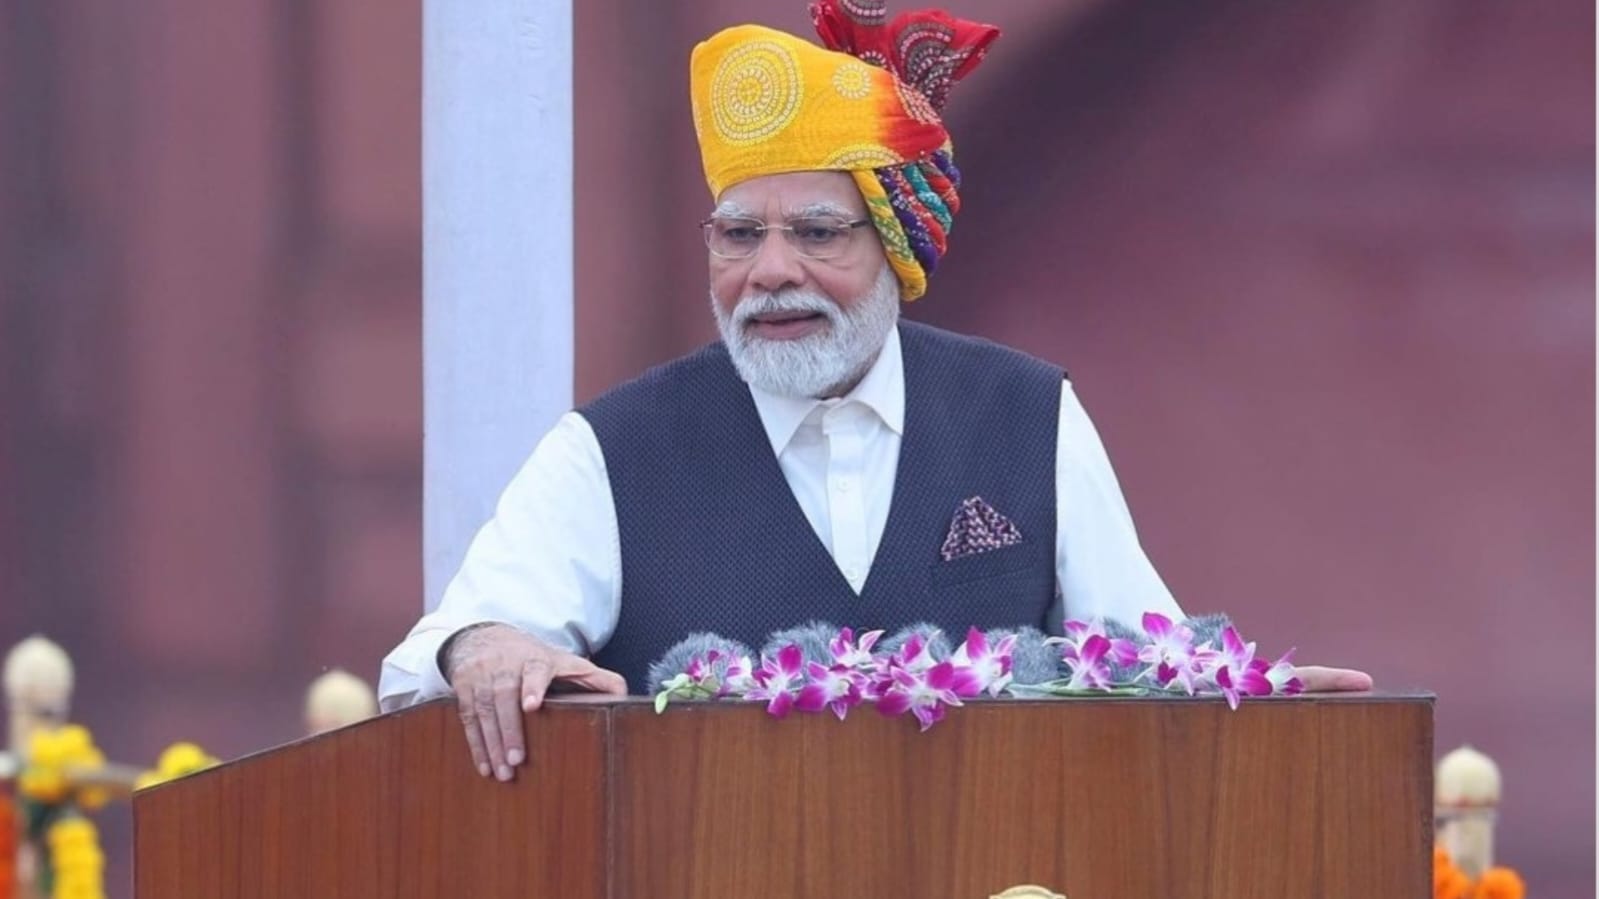 PM Modi to Attend Annual Police Conference in Jaipur, Focus on AI, Cybersecurity, and Counter-Terrorism